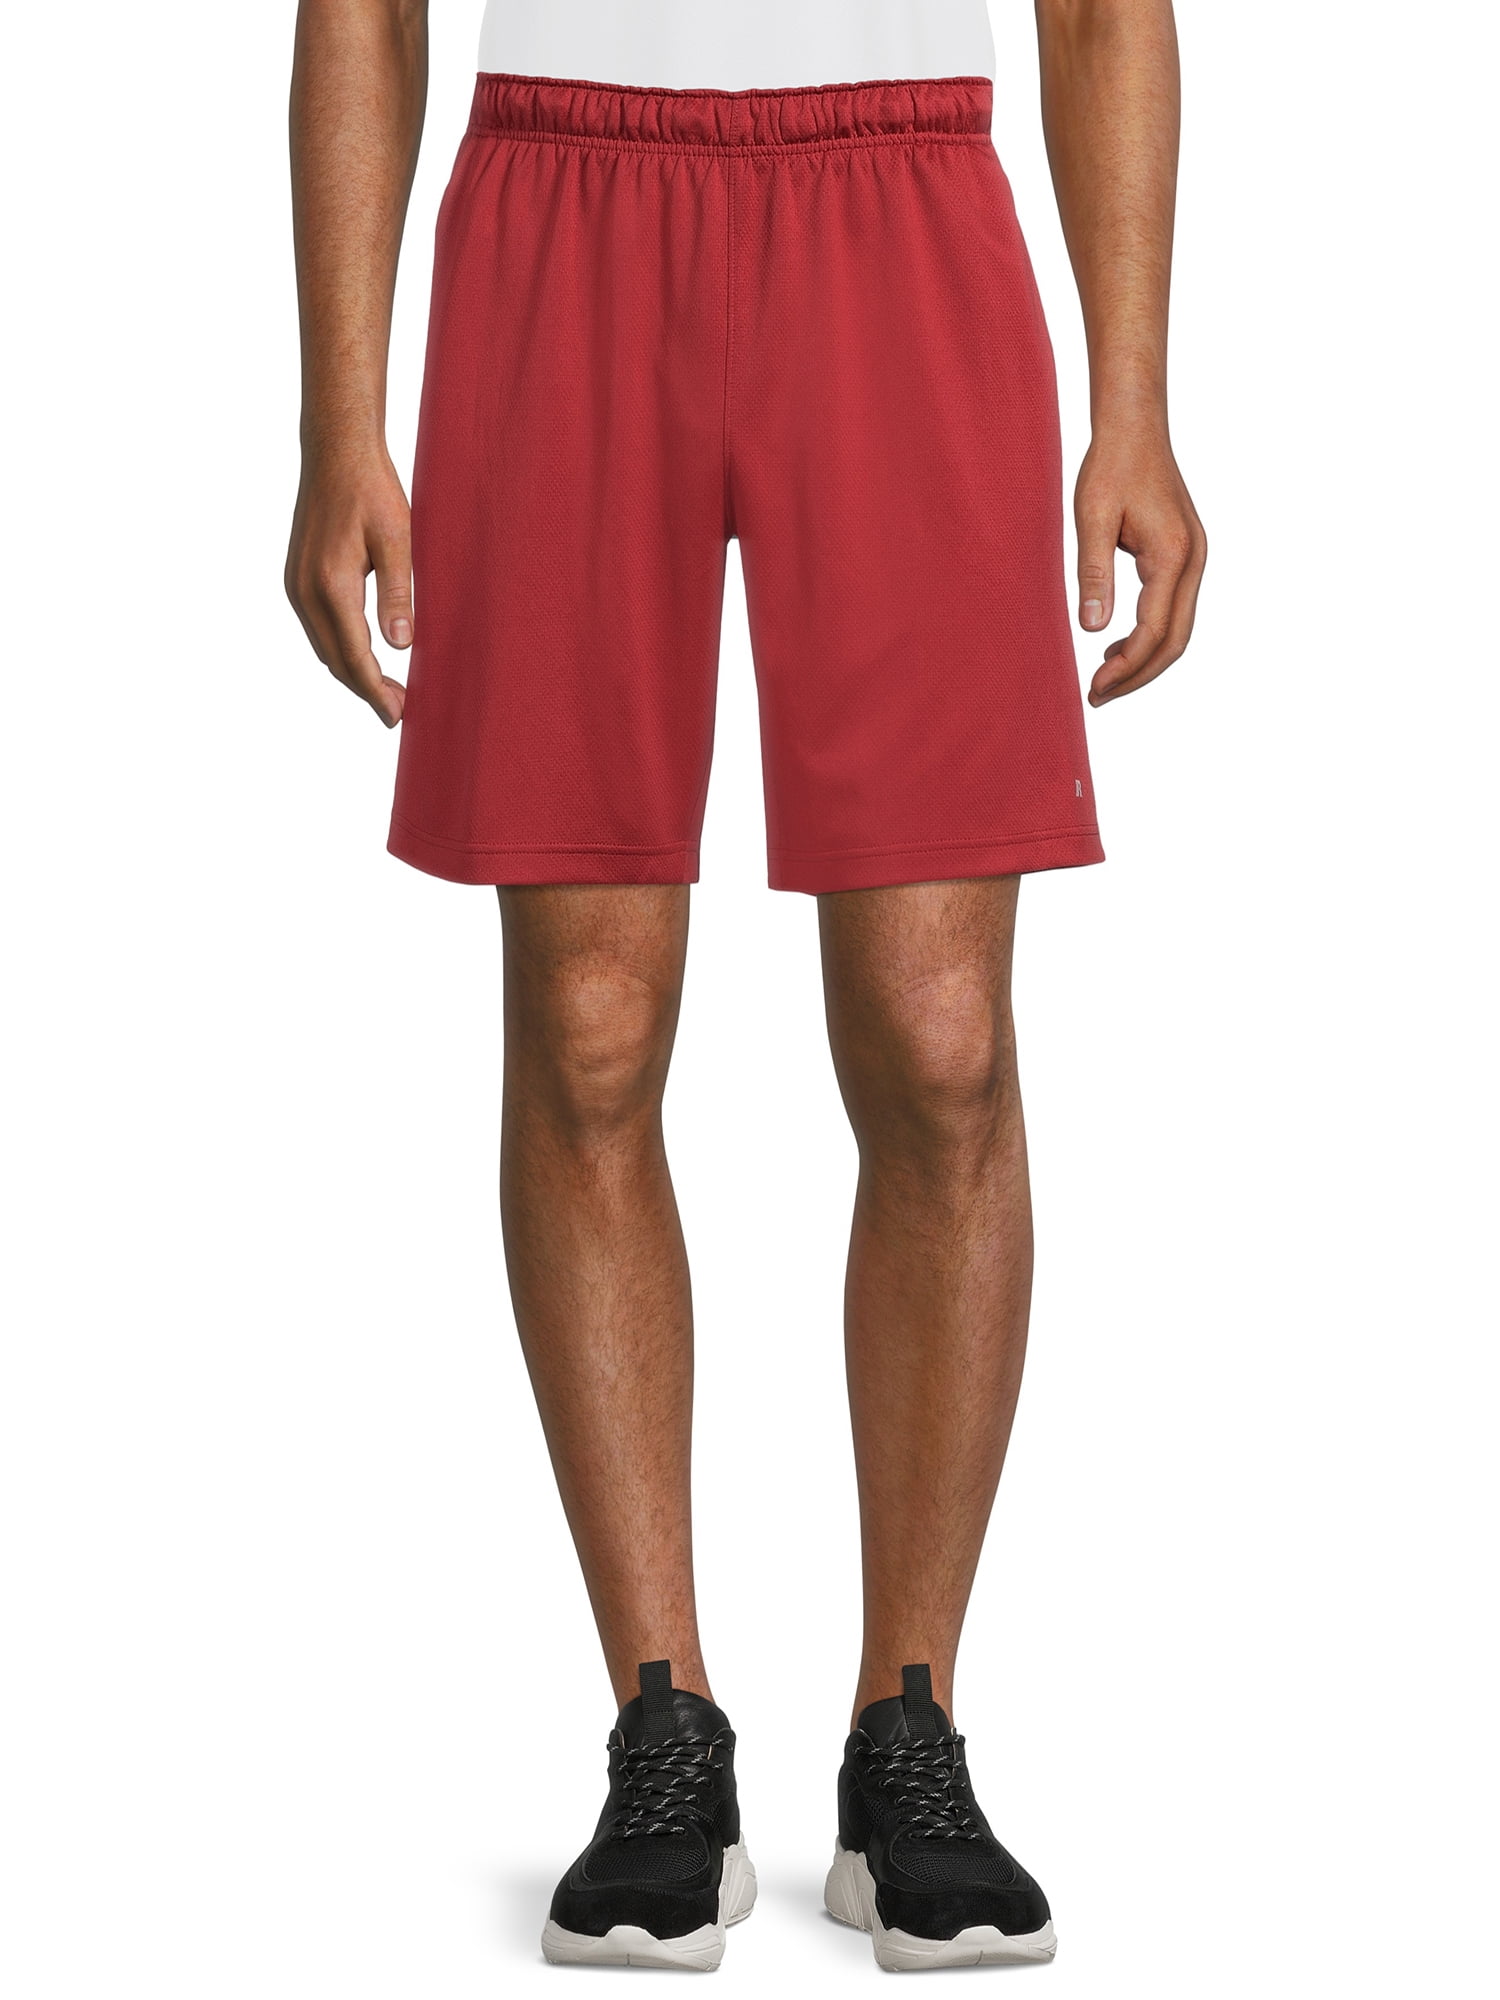 Under Armour Men's Tech Mesh Training Shorts 1271940 600 Red Gray Steel L 